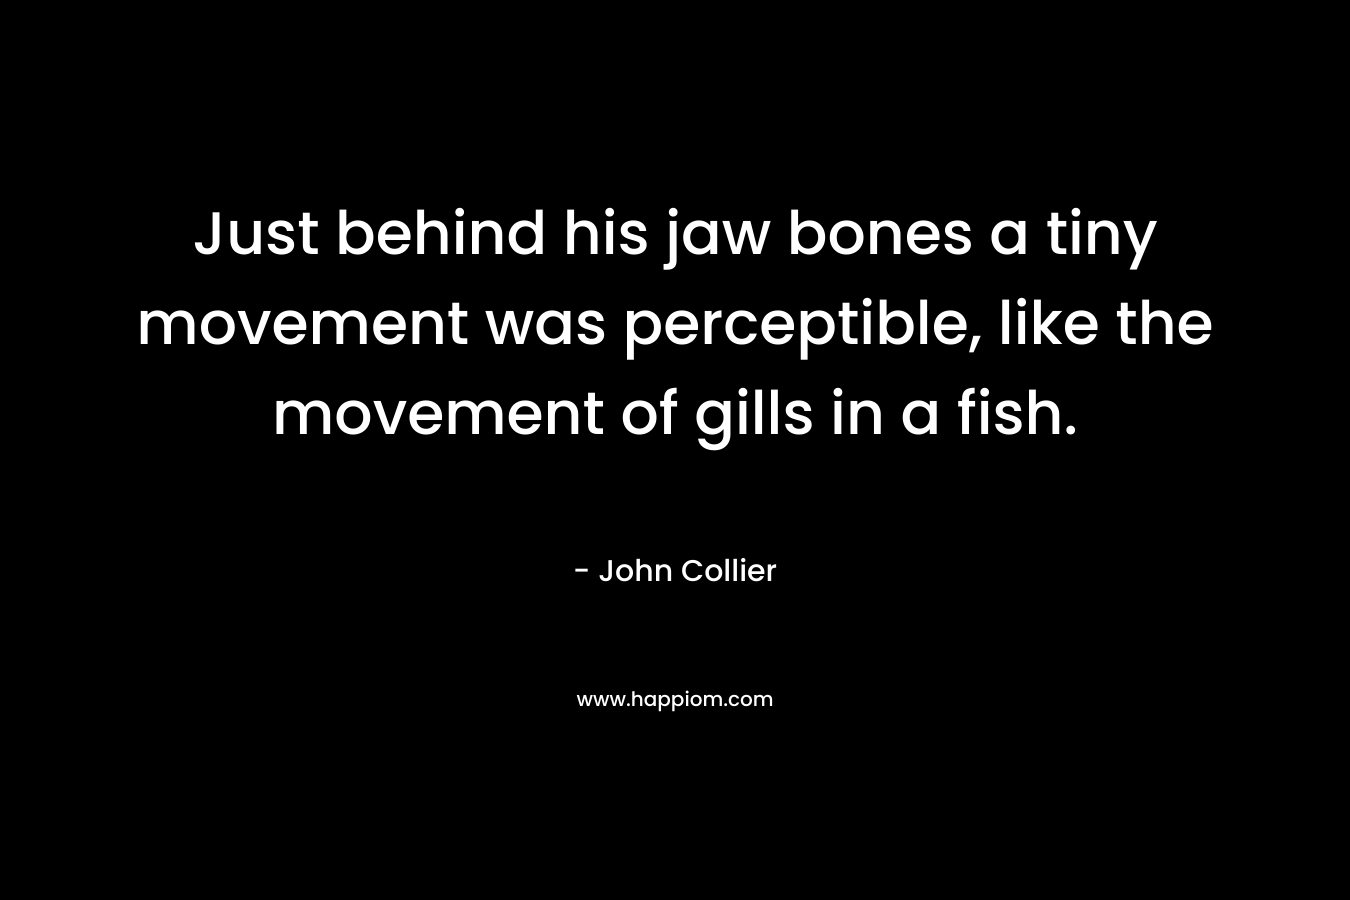 Just behind his jaw bones a tiny movement was perceptible, like the movement of gills in a fish. – John Collier